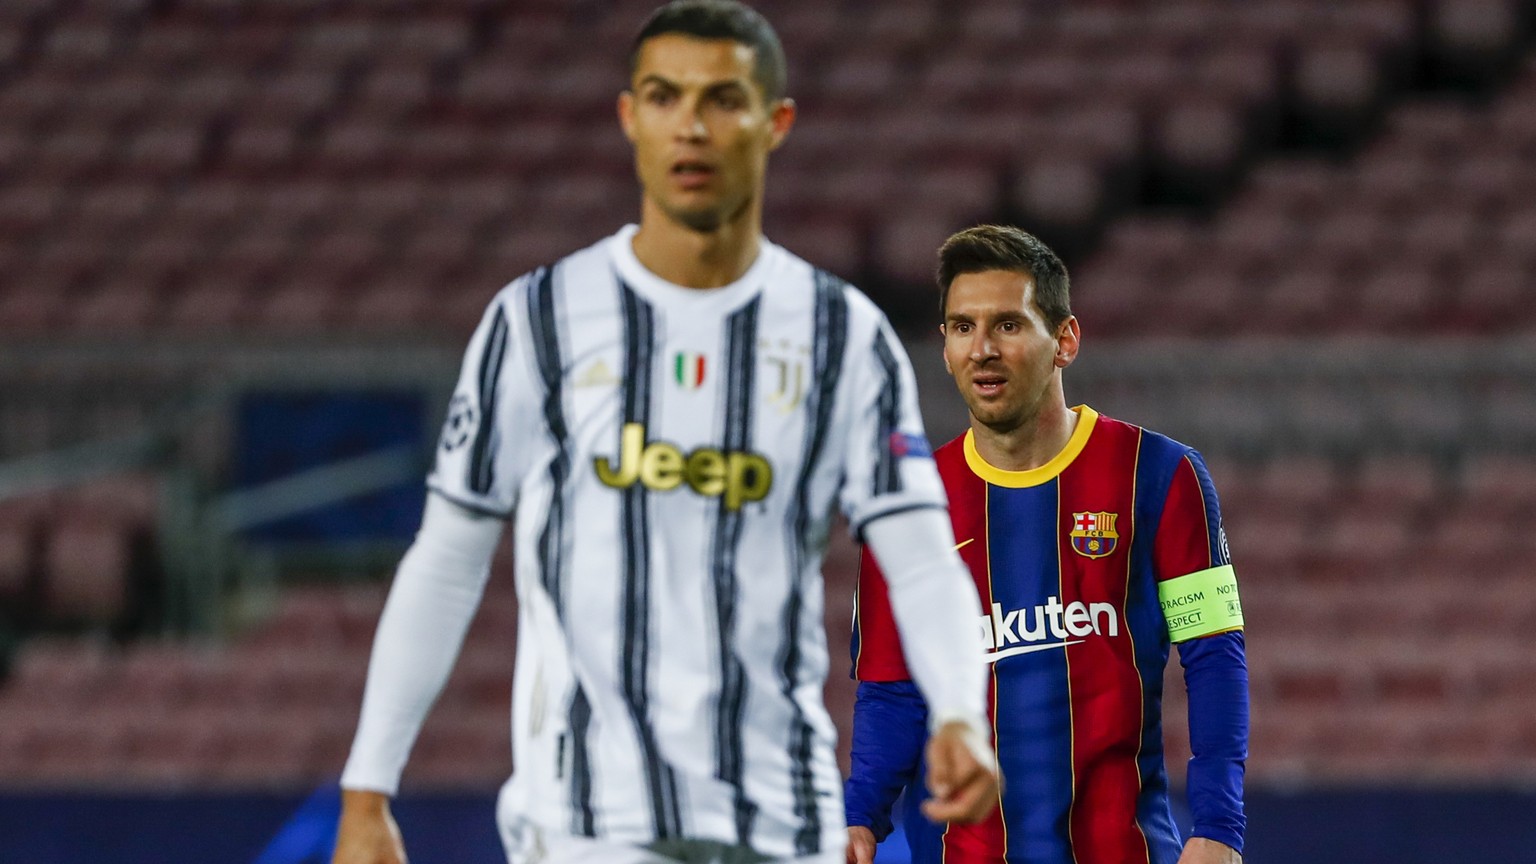 Barcelona&#039;s Lionel Messi, right, and Juventus&#039; Cristiano Ronaldo during the Champions League group G soccer match between FC Barcelona and Juventus at the Camp Nou stadium in Barcelona, Spai ...